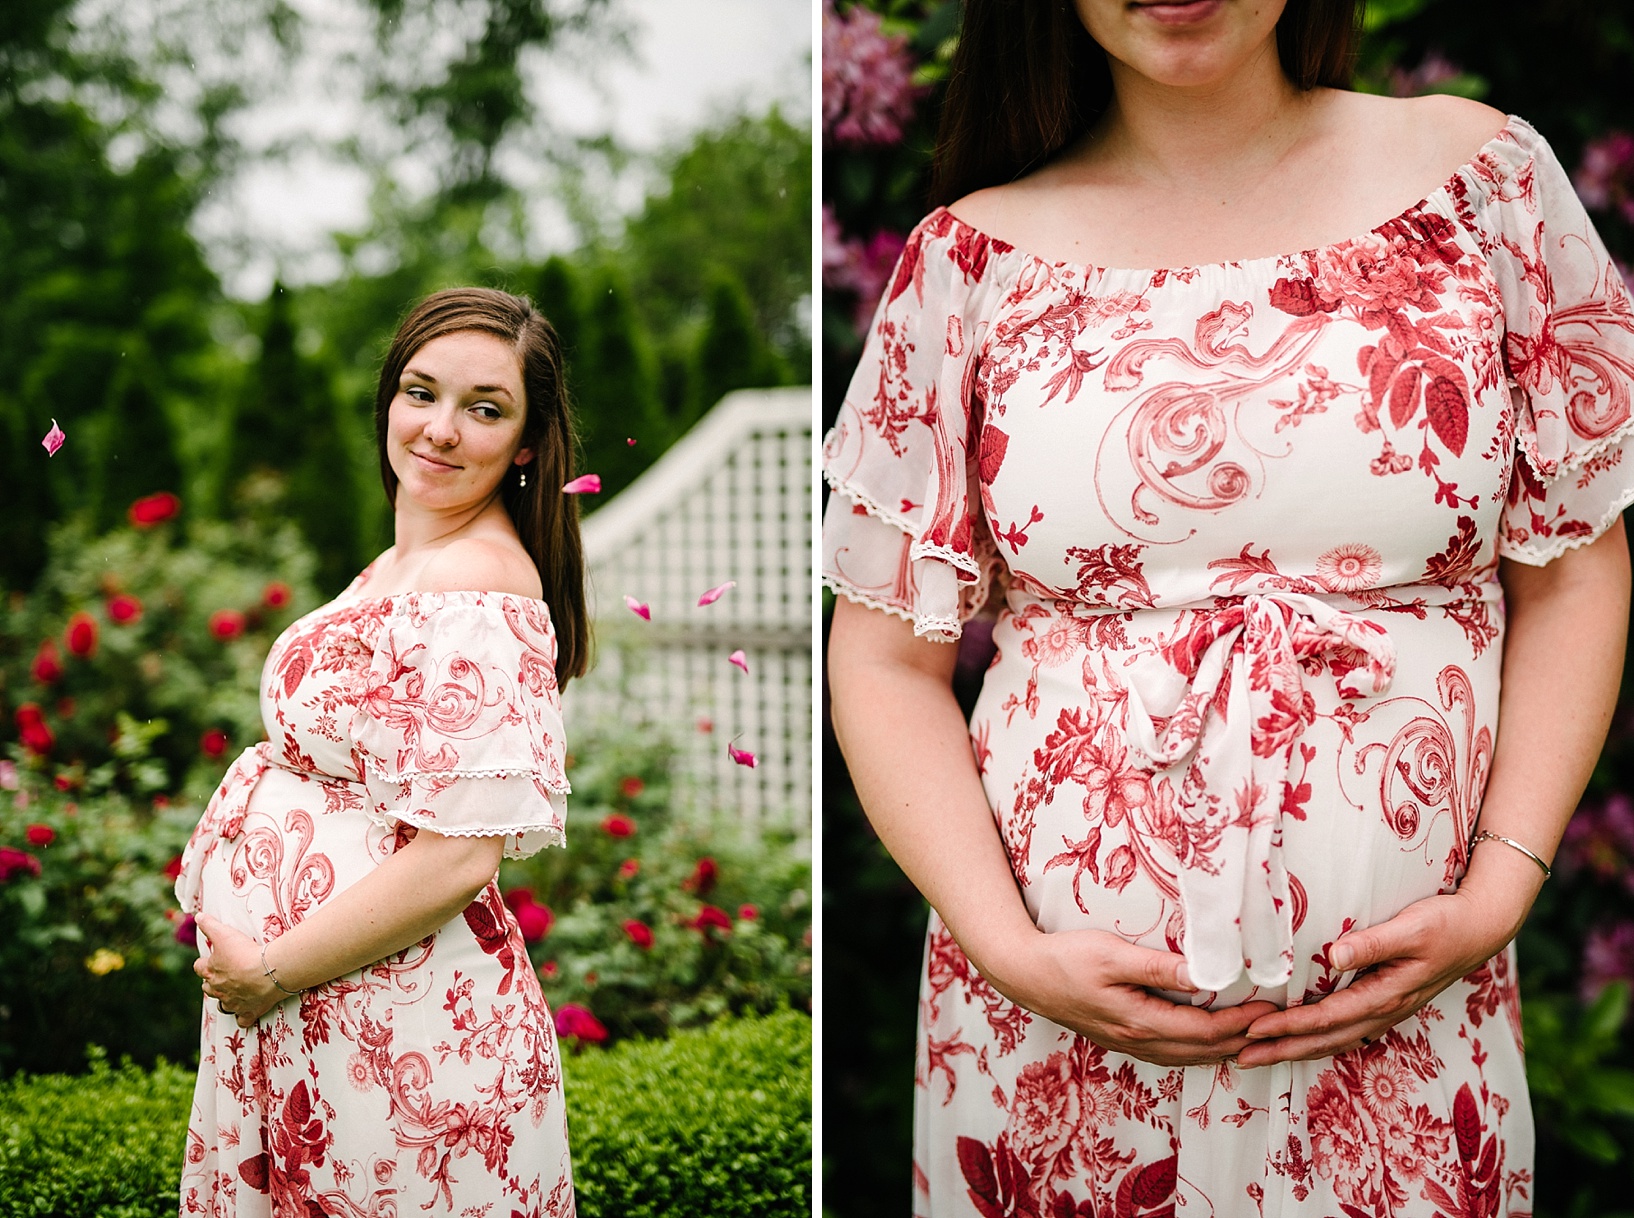 Pregnant woman in white and red floral dress holds her belly